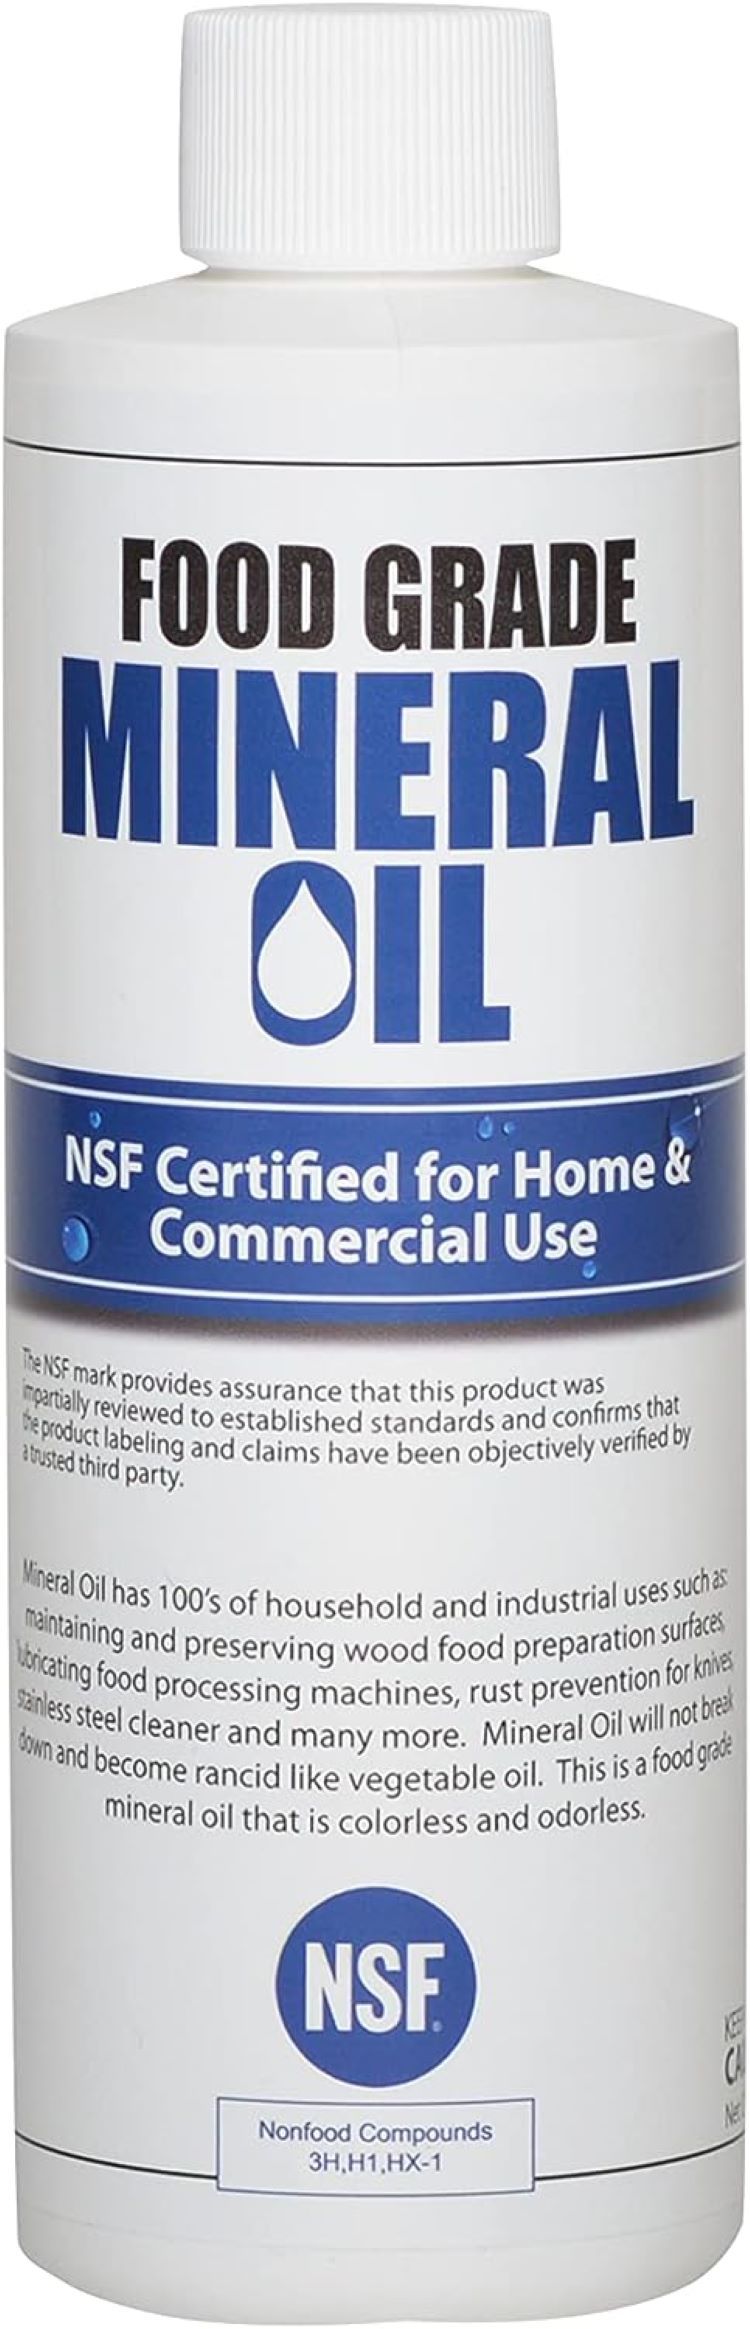 Mineral oil protects knives and helps me poop? 